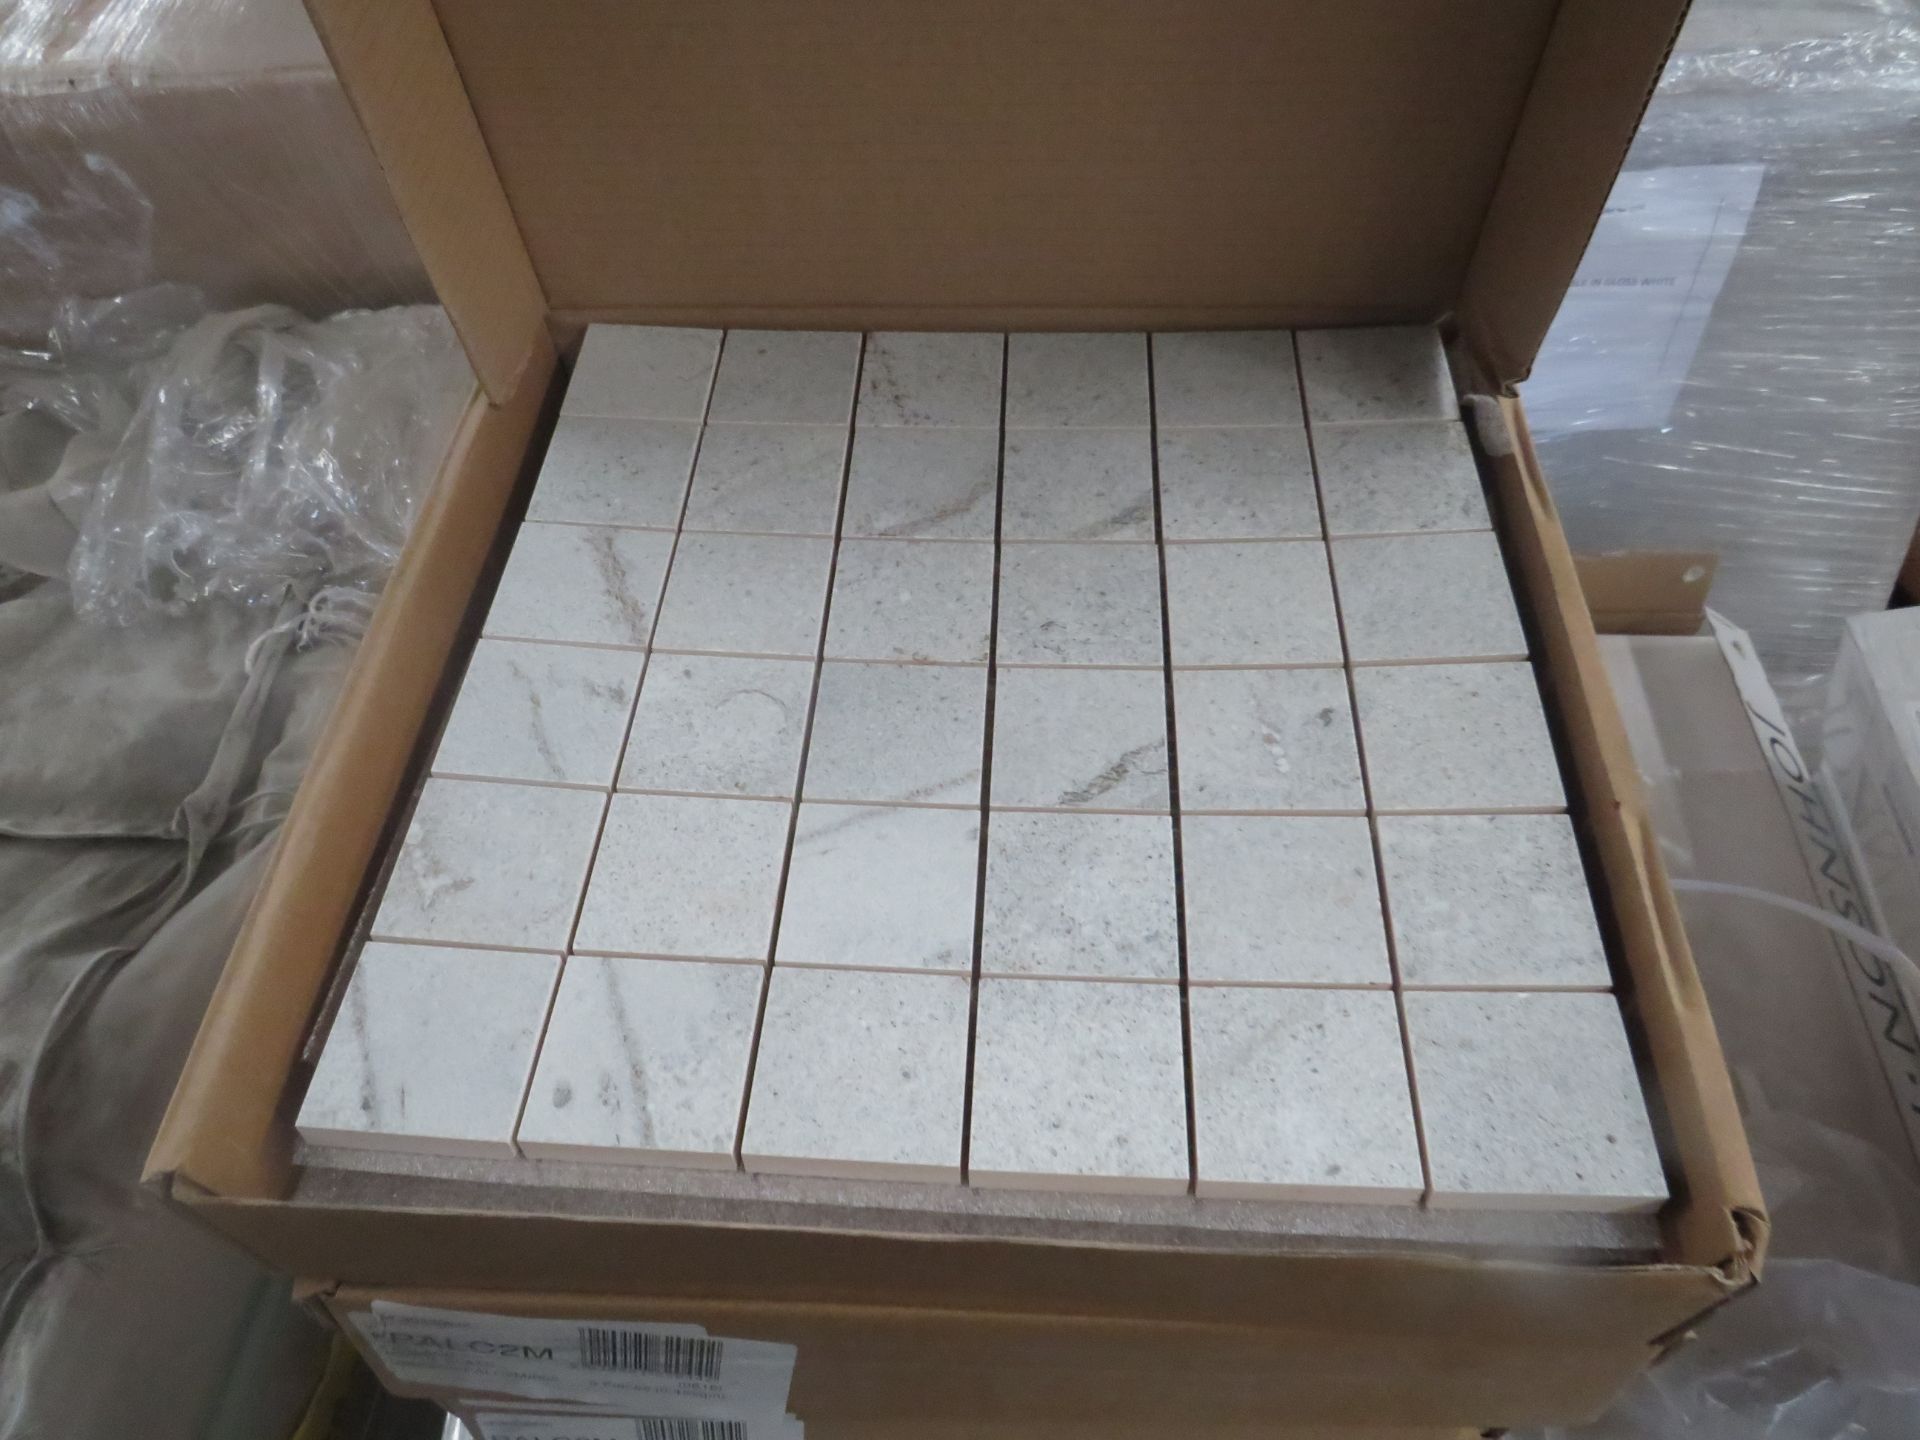 5x Packs of 5 Palace Cool slate 300x300mm Mosaic tile sheets ref PALC2M, brand new and boxed. RRP